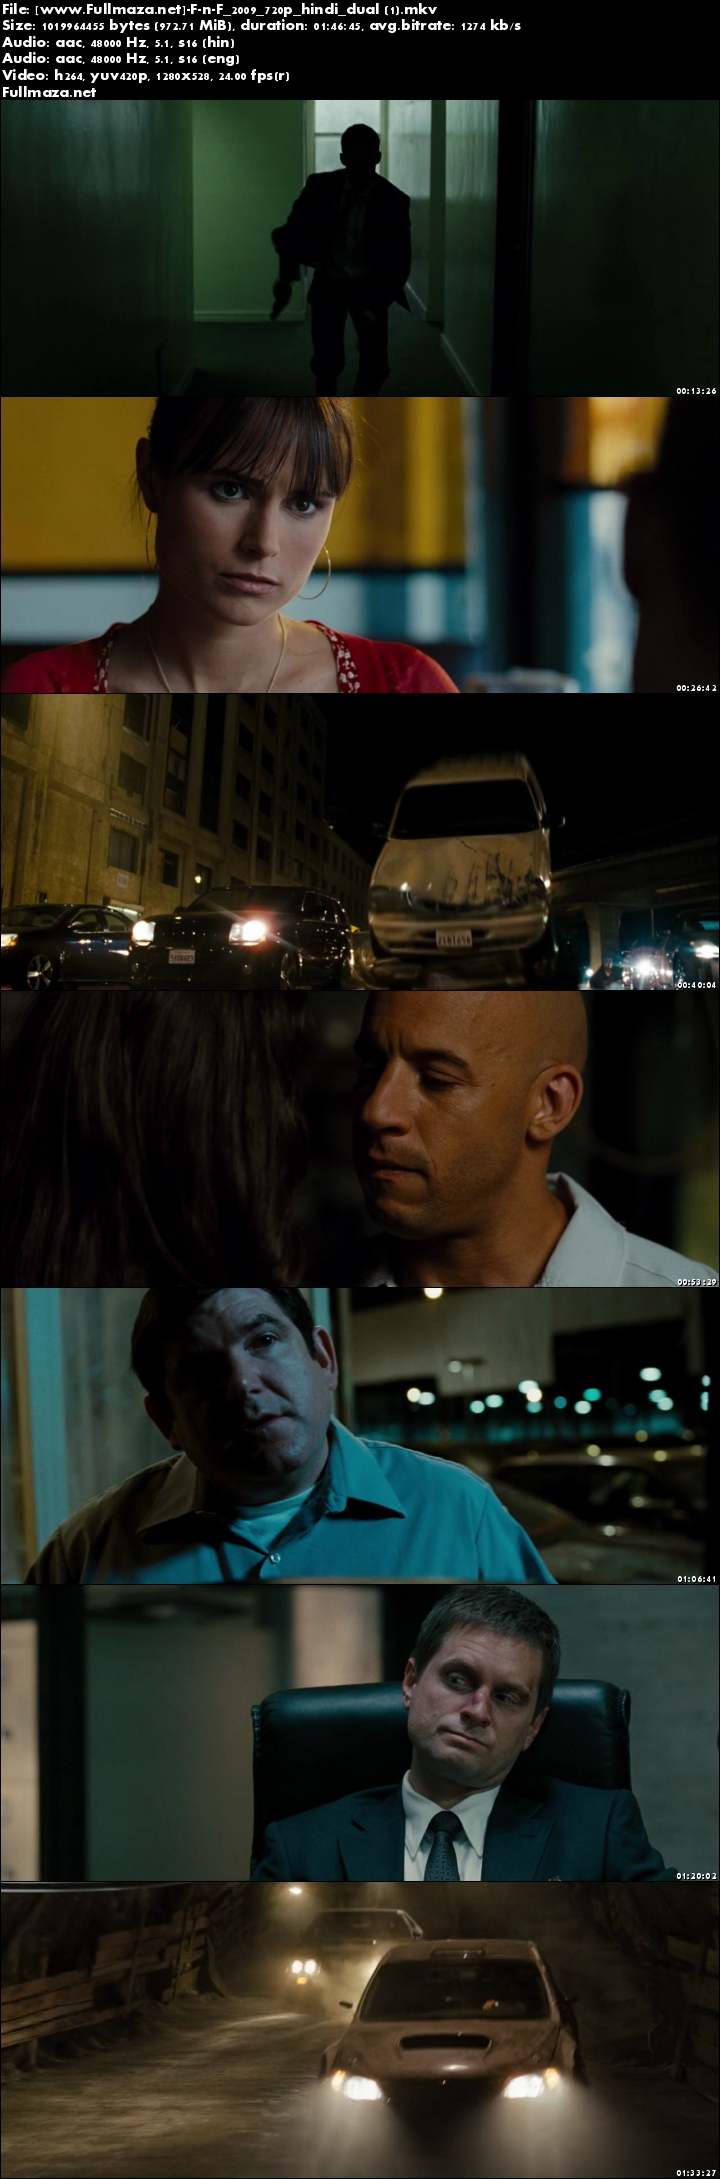 fast and furious 7 torrent download 720p